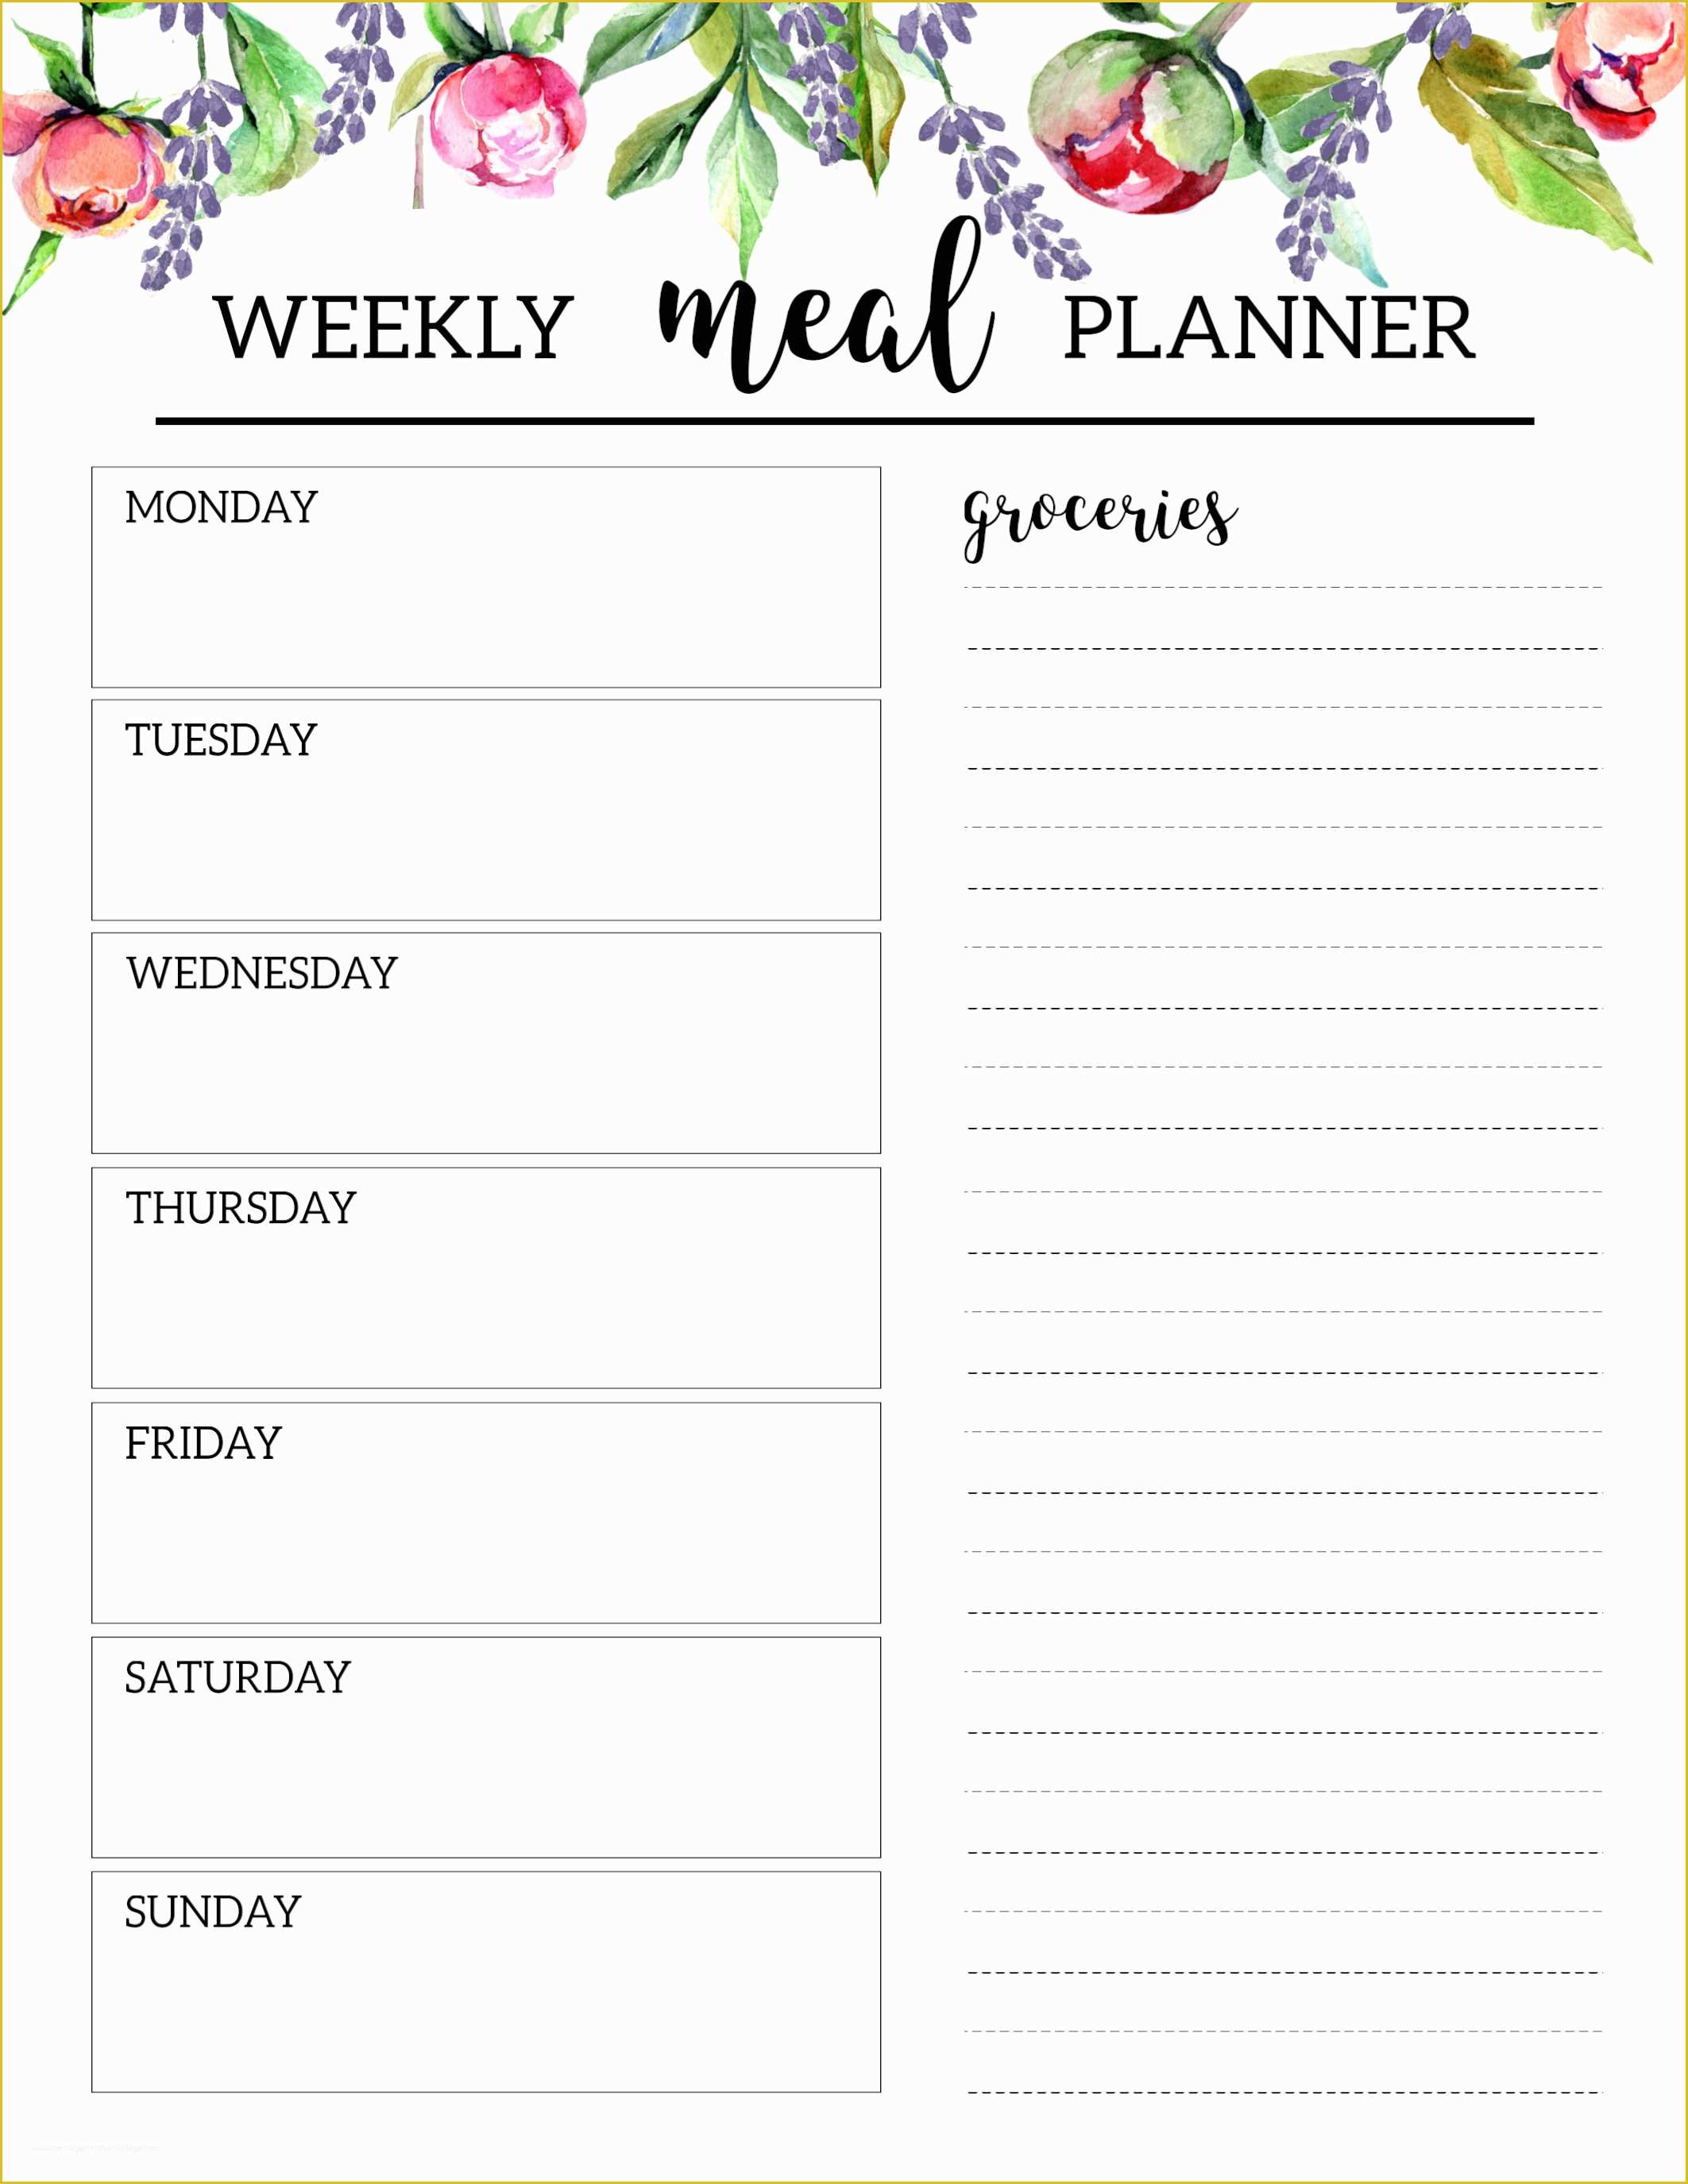 Daily Food Plan Template